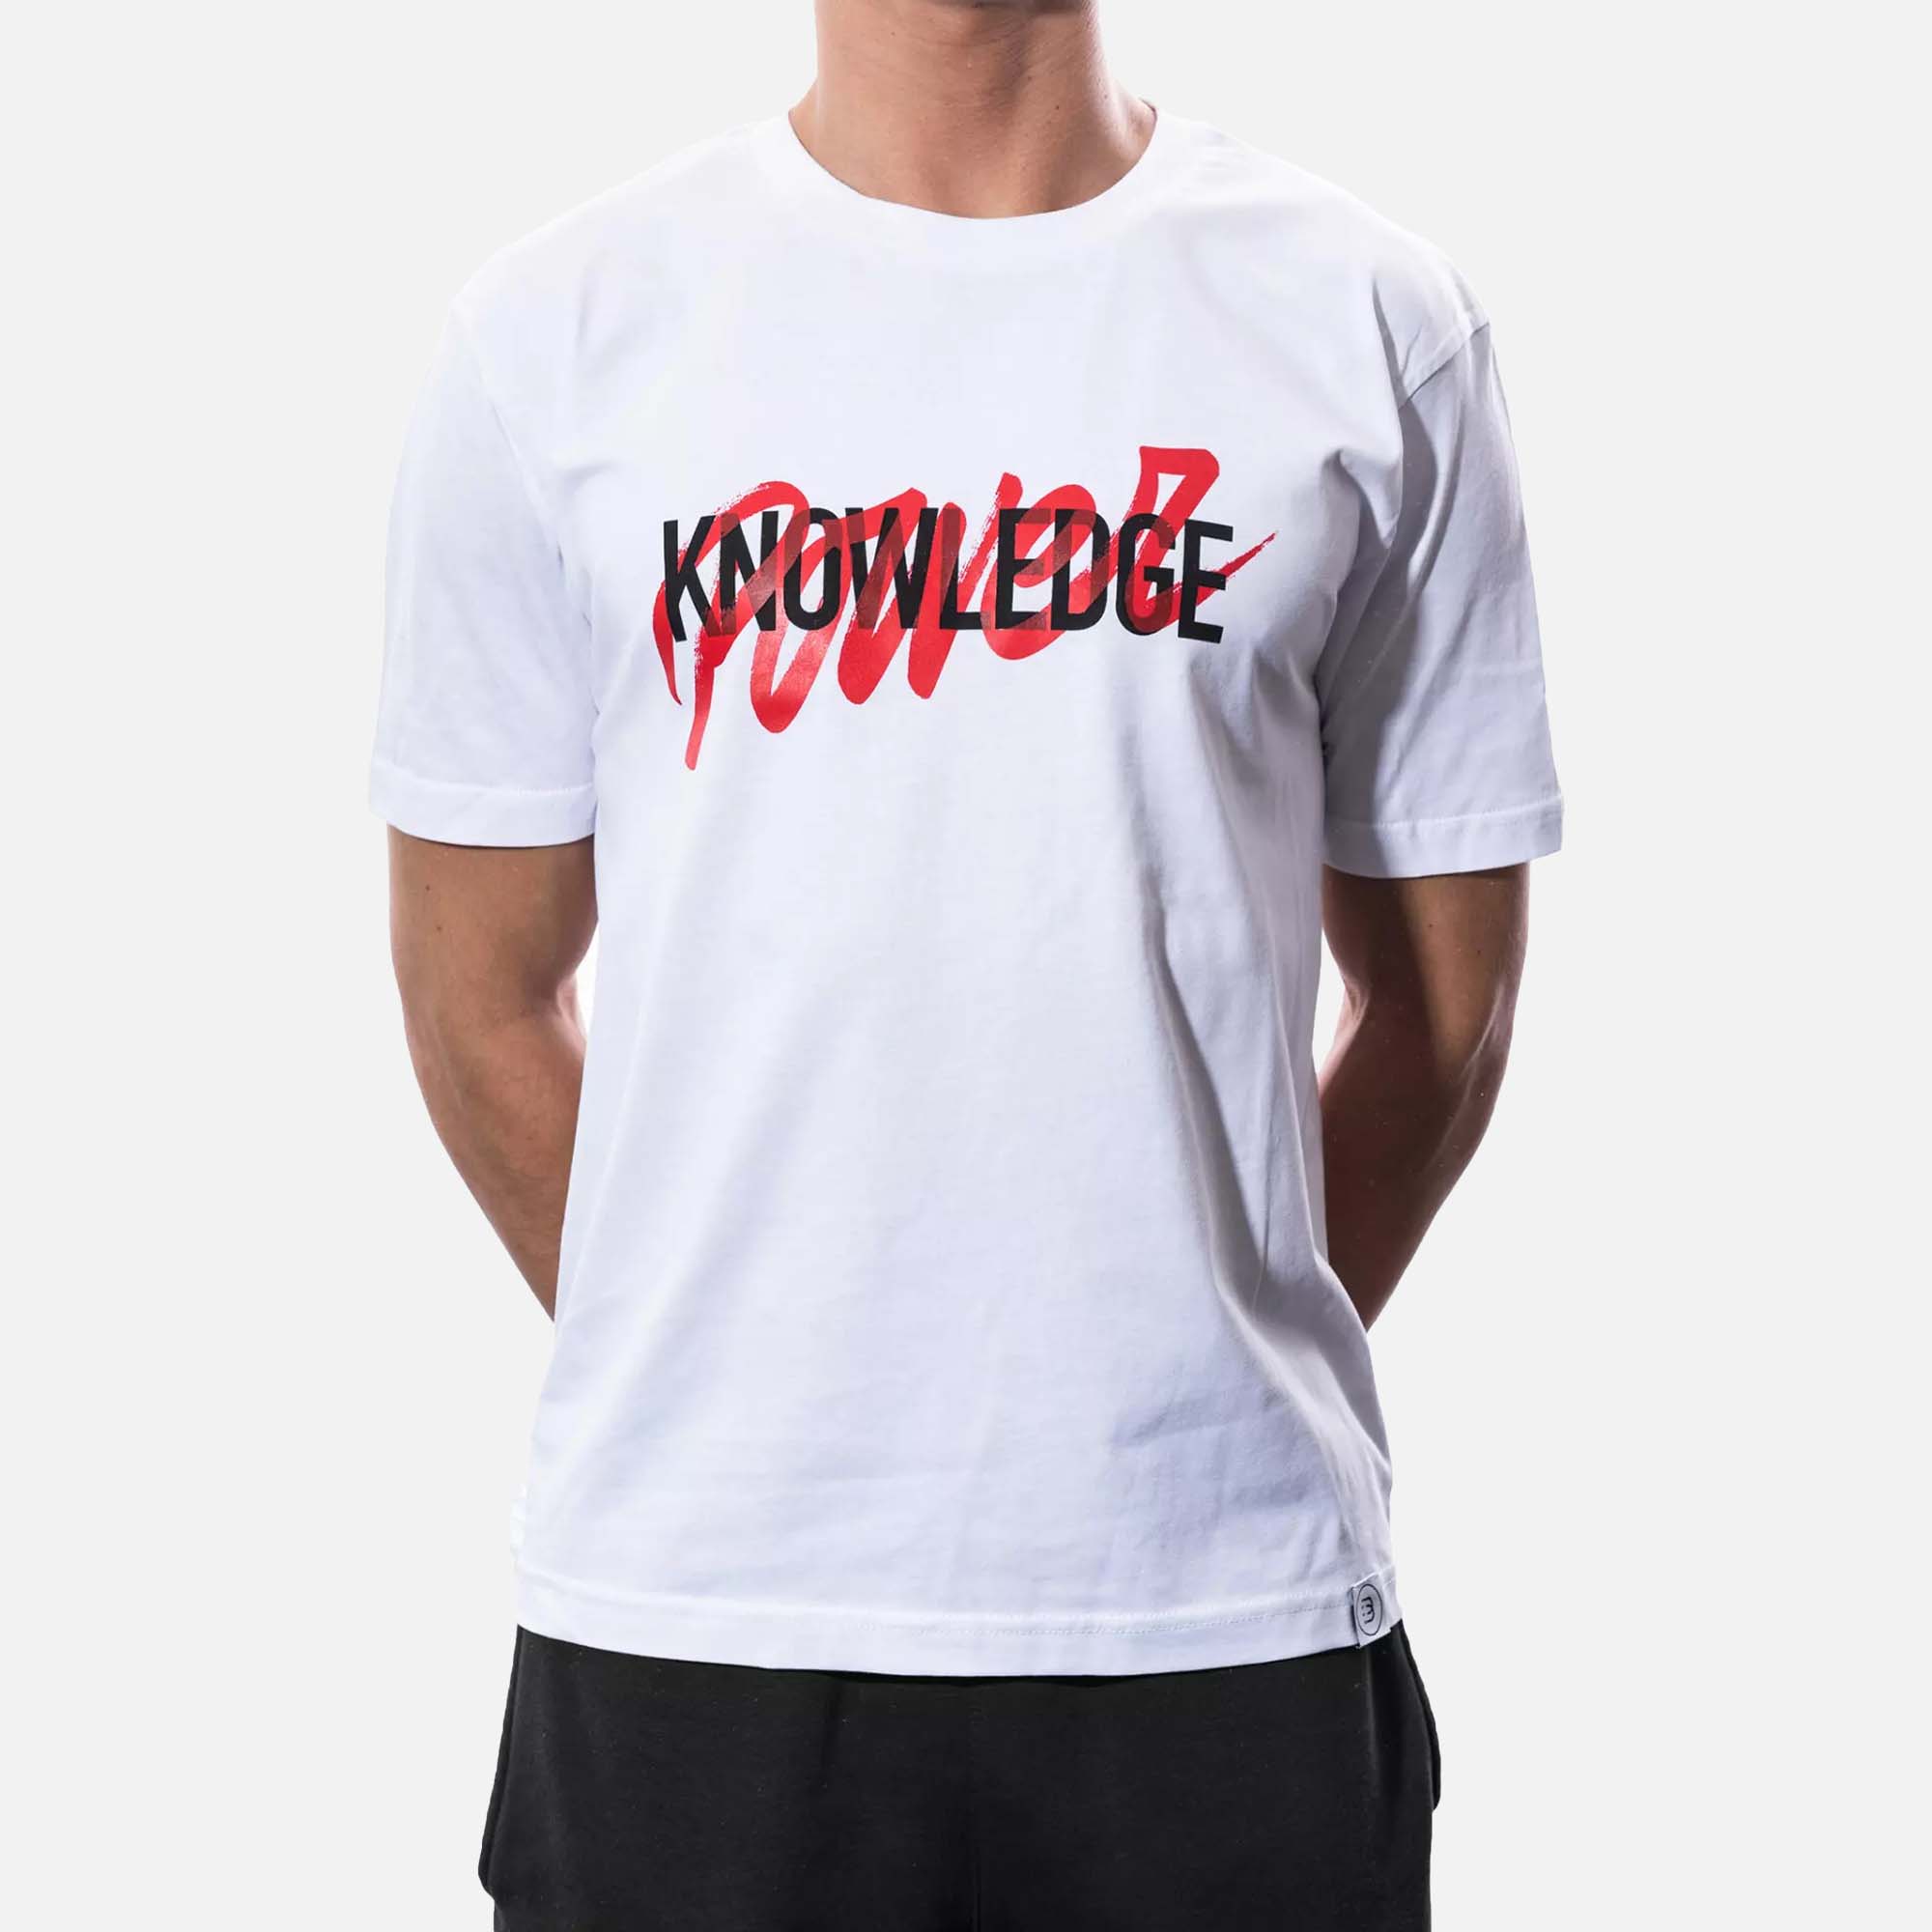 Power is Knowledge T-Shirt